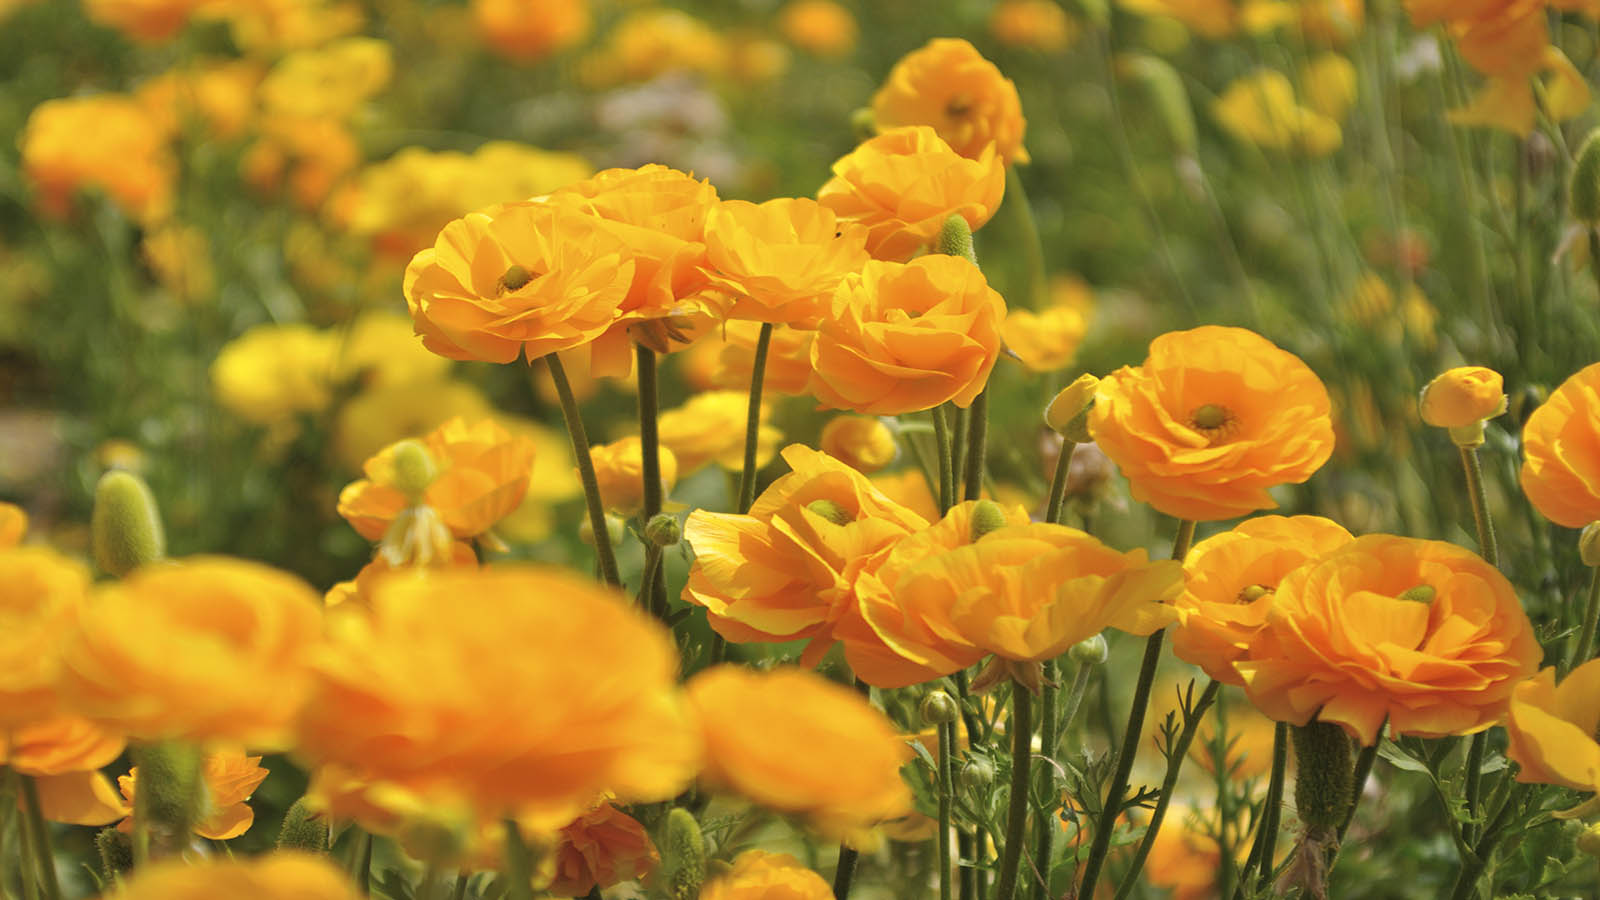 Ranunculus Flower Meaning: Youthful Beauty and Innocence